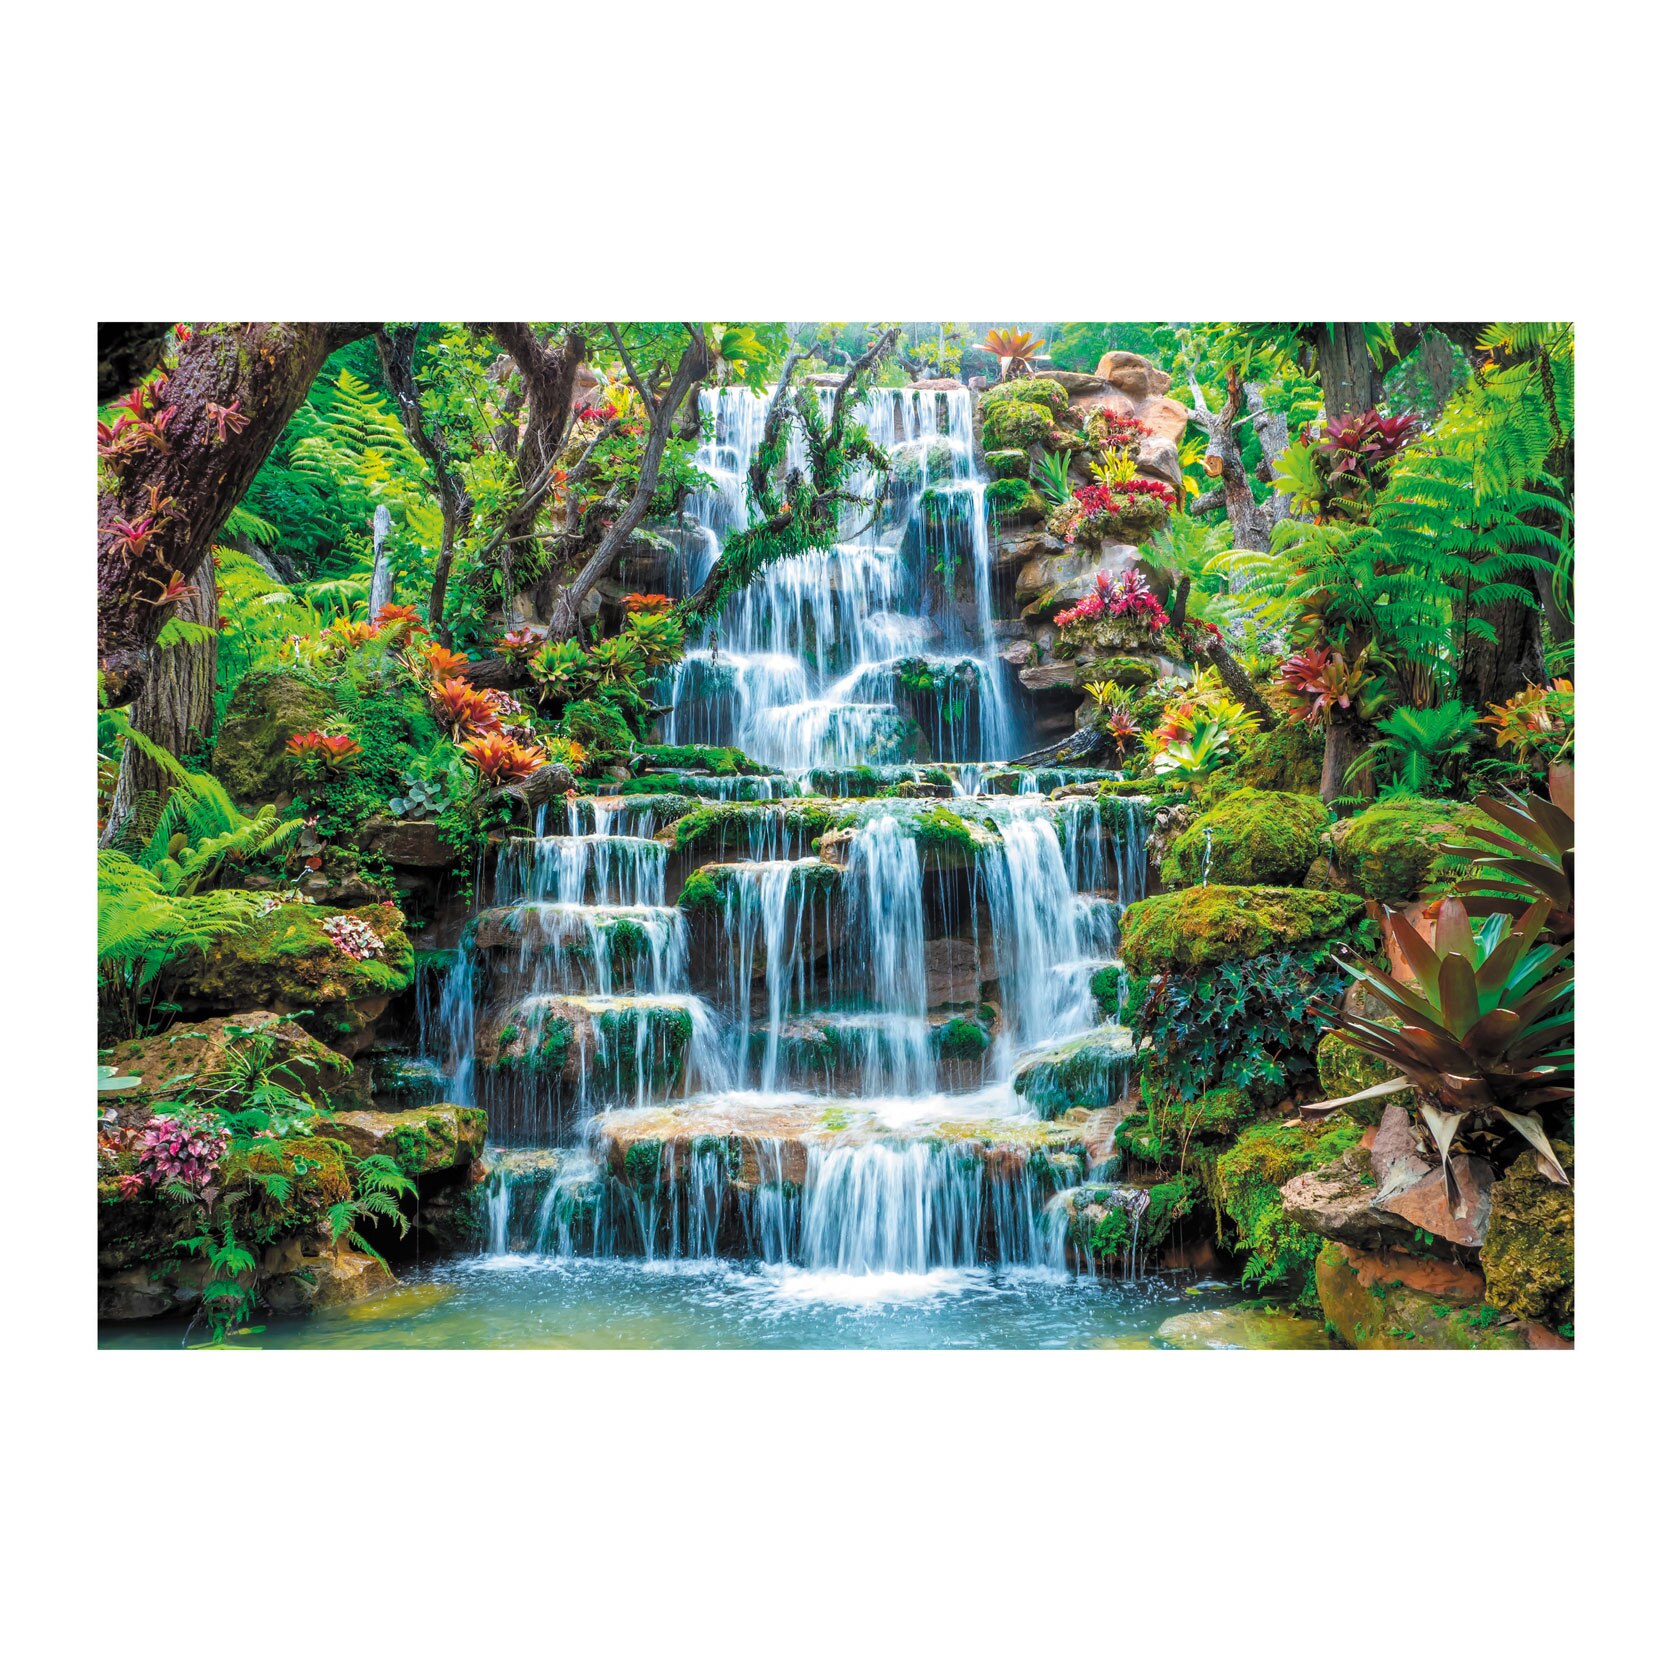 Clementoni - Peace Puzzle - The Waterfall - 500 pezzi - puzzle